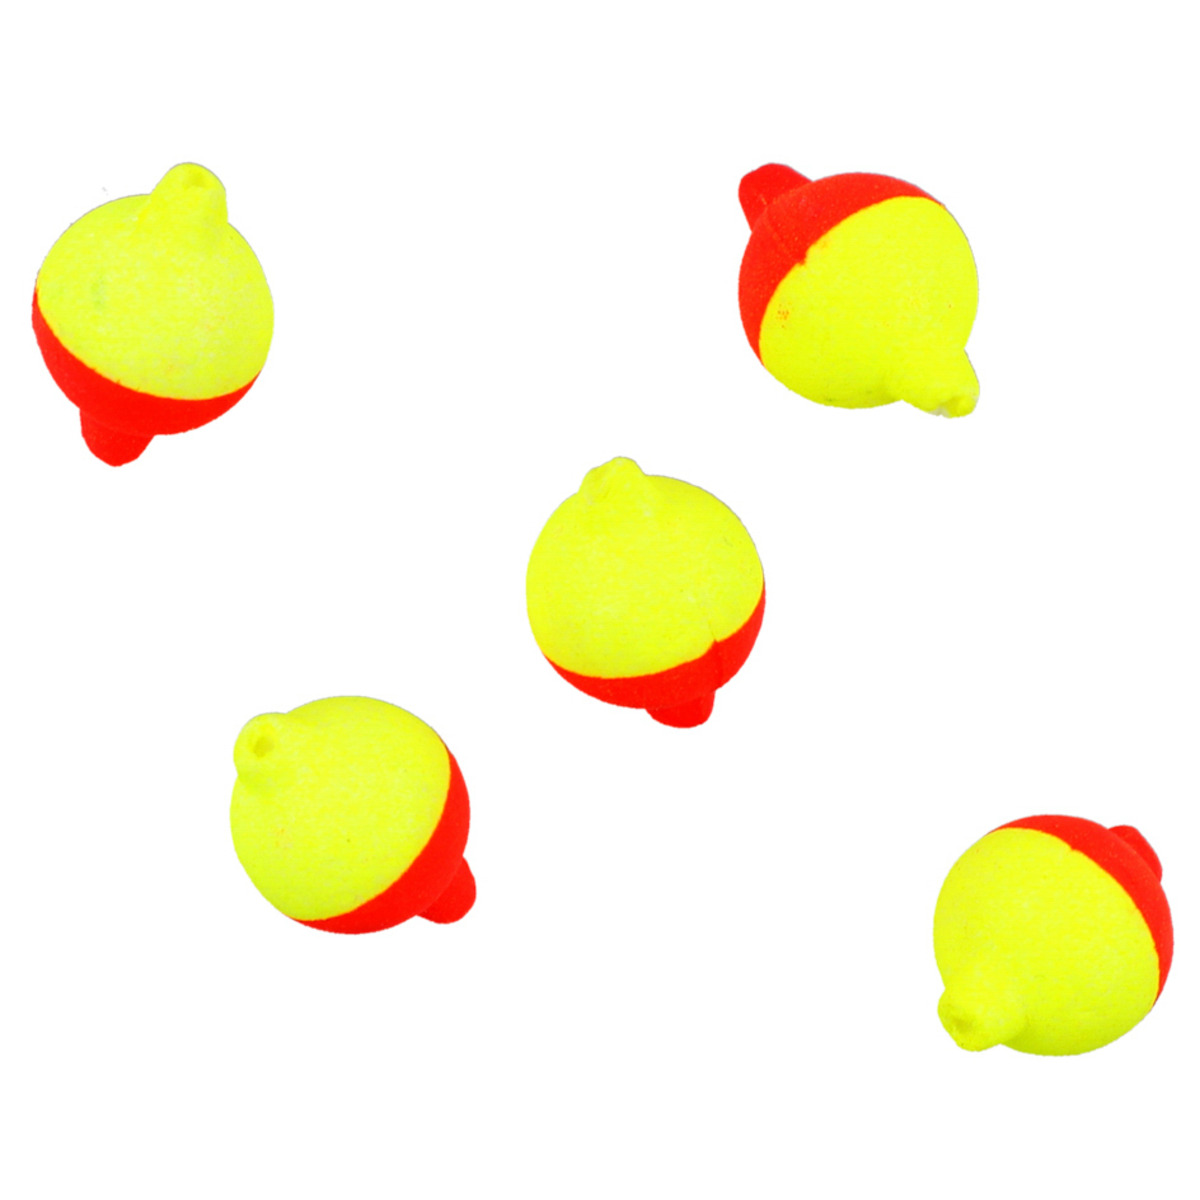 Mikado Surfcasting Ballsfloating Diameter - 16mm  RED AND YELLOW